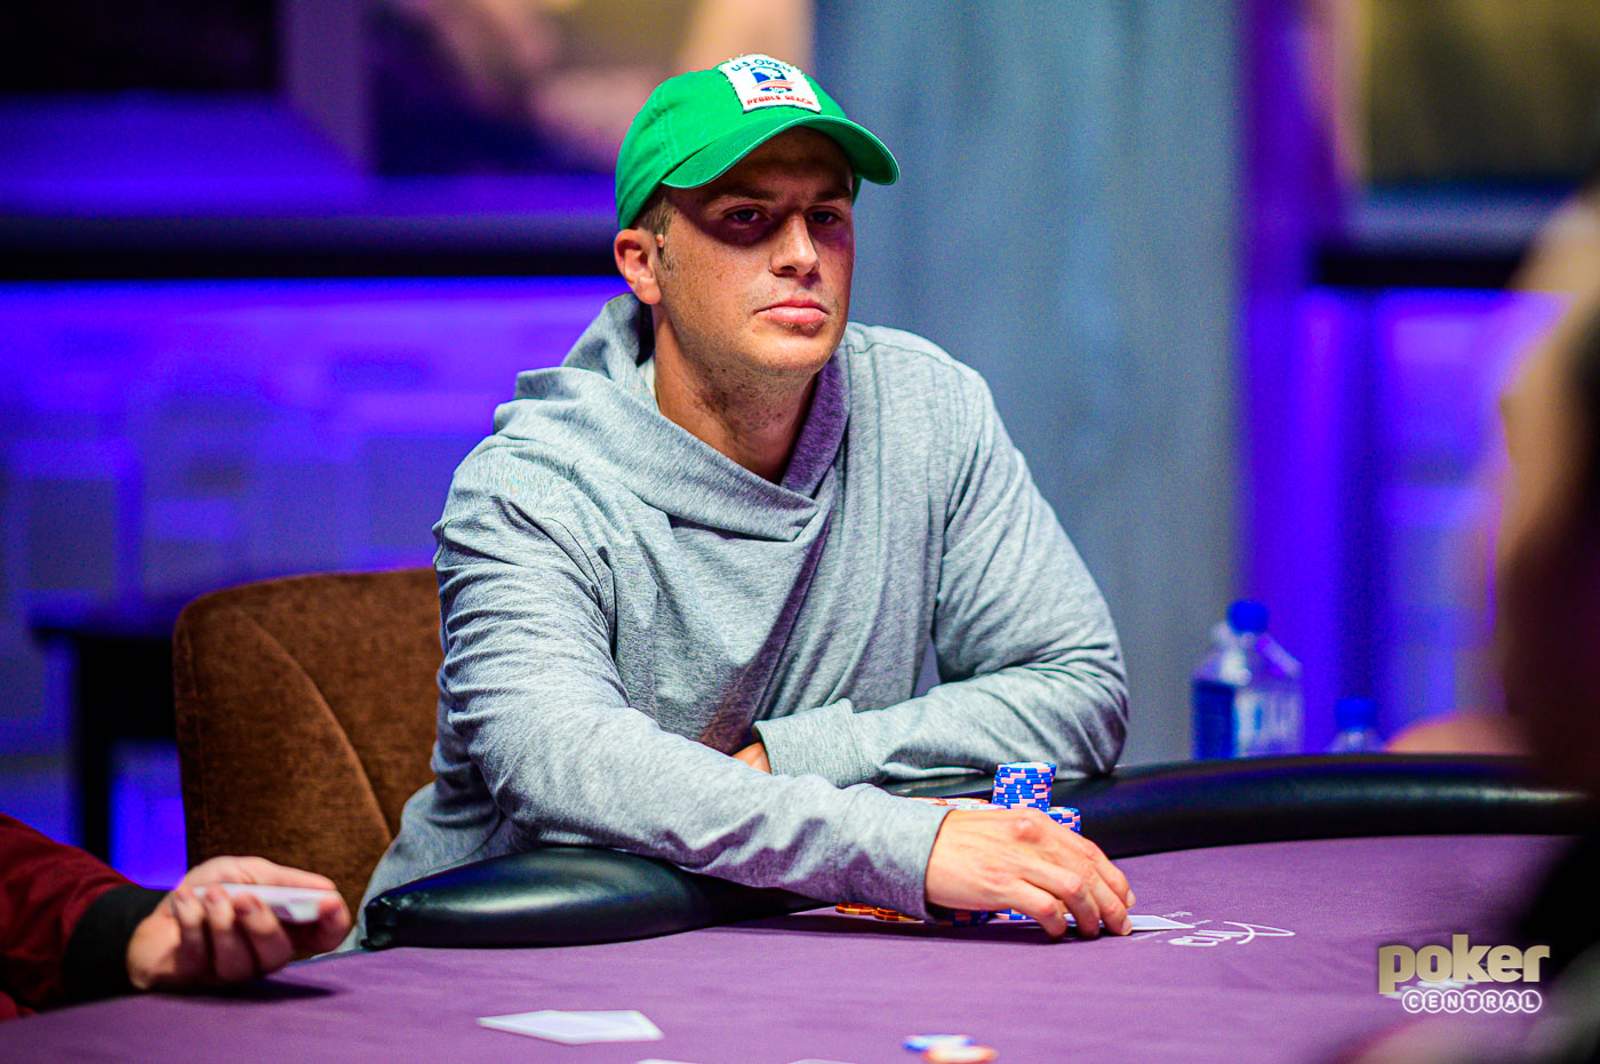 Isaac Baron Bags Big, Leads Poker Masters Event #1 Final Table